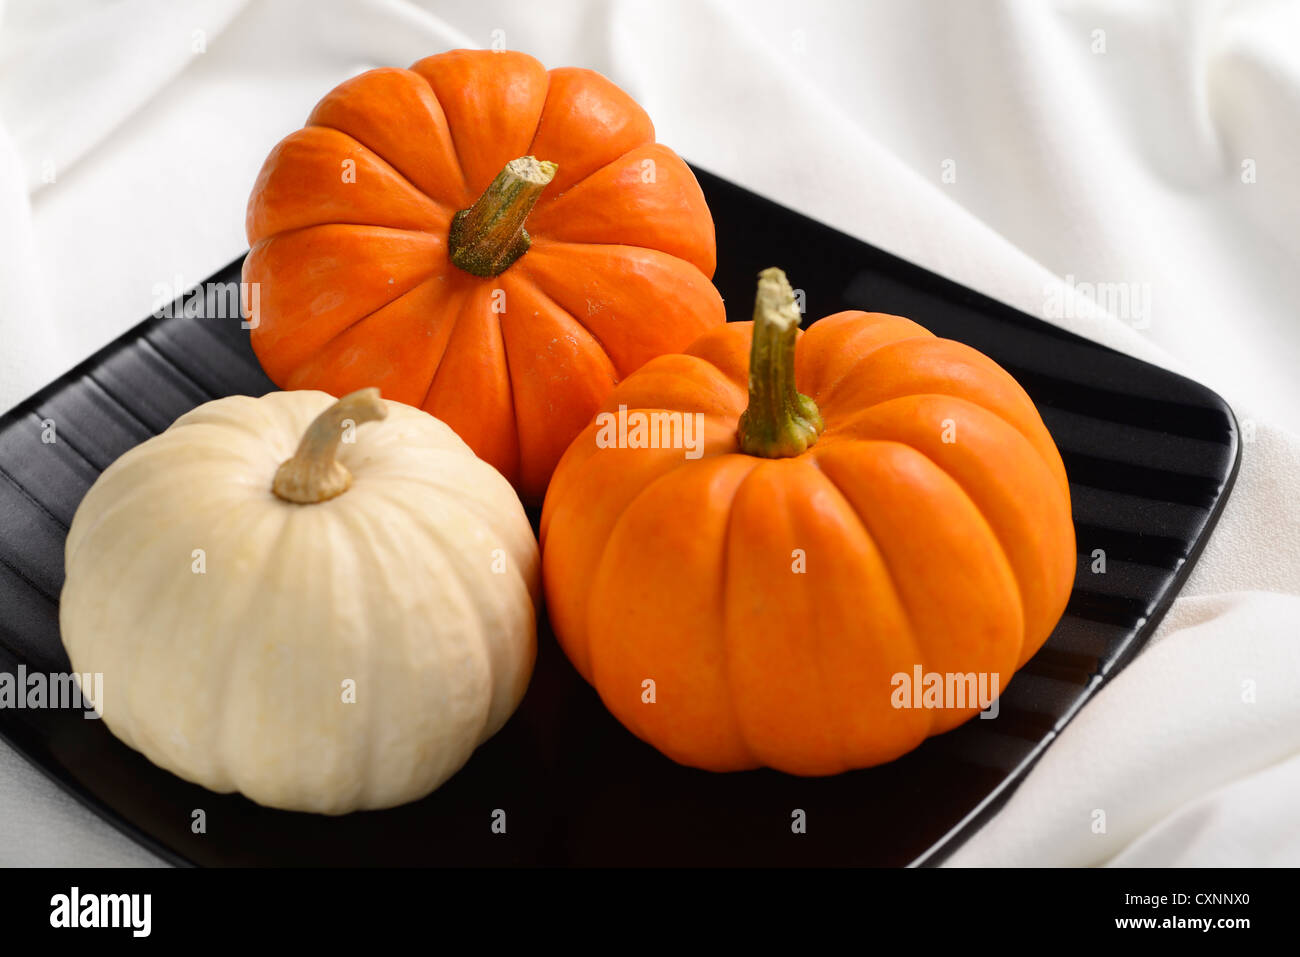 Orange Jack Be Little and white Baby Boo miniature pumpkins on a square black plate Stock Photo